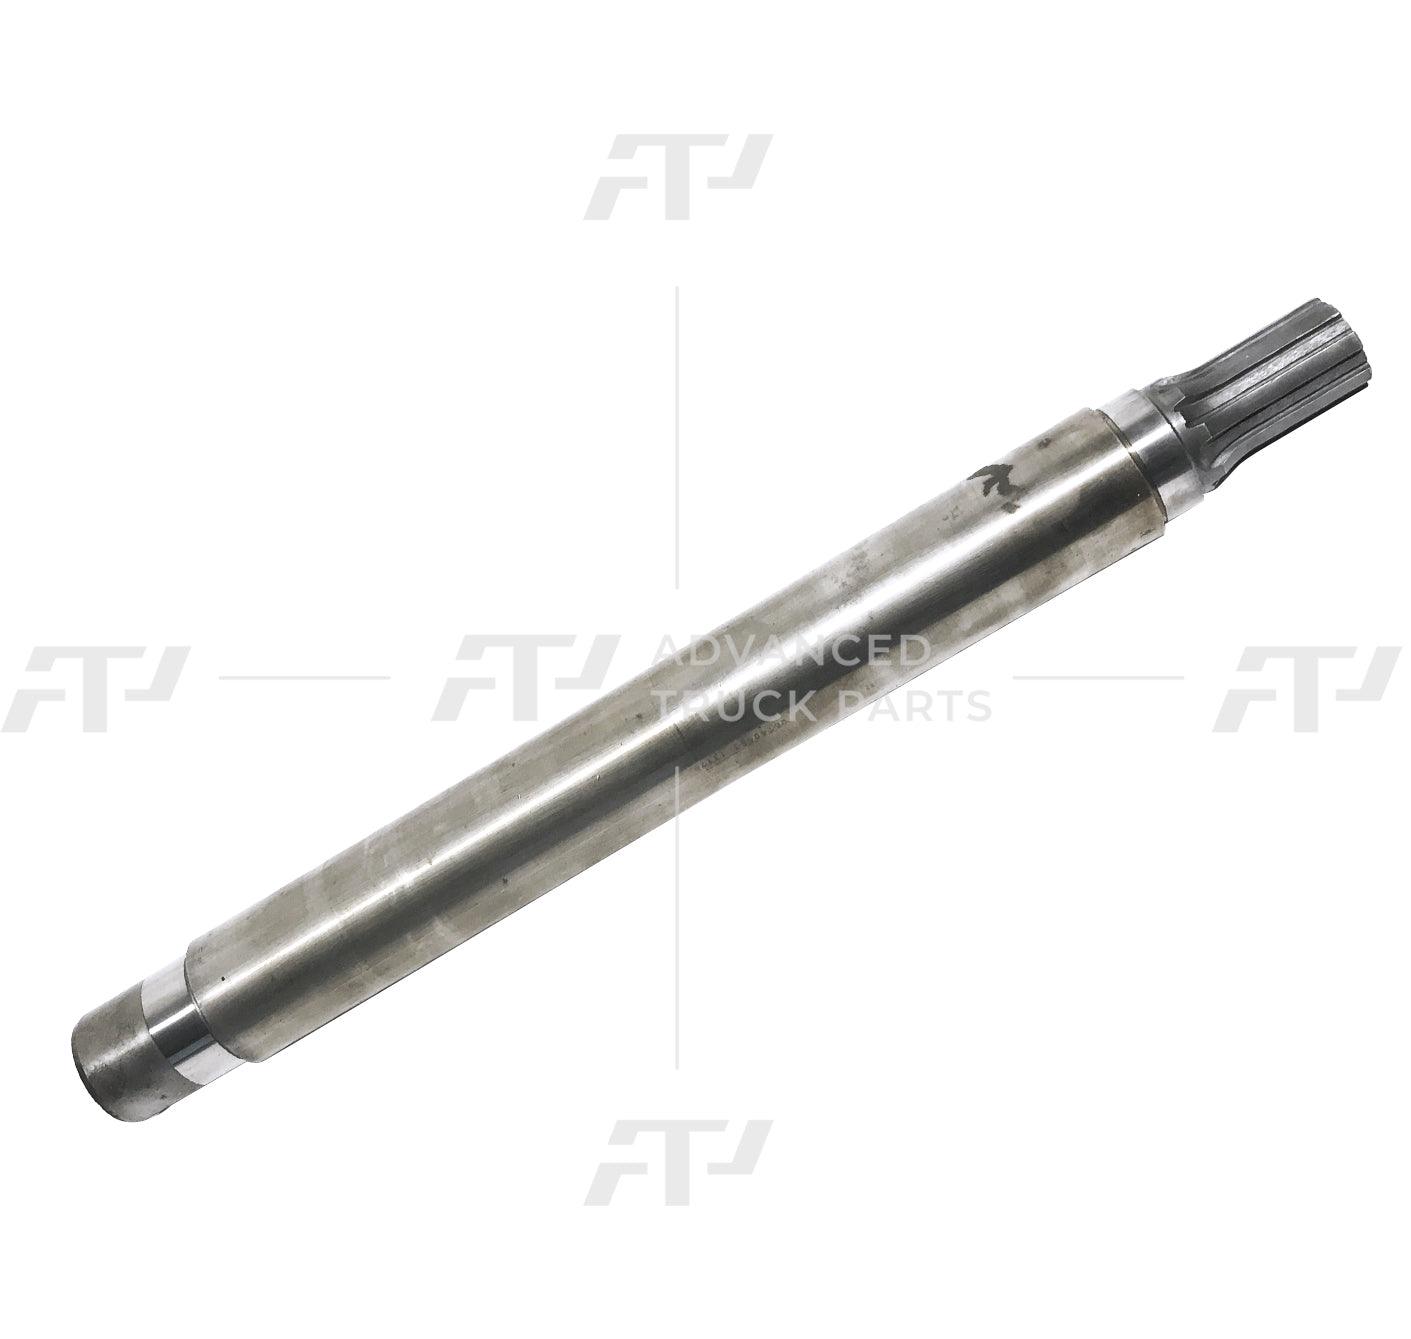 06T40553 Muncie Pto Power Take Off Output Shaft I Cs20 For Series Din 5462 - ADVANCED TRUCK PARTS